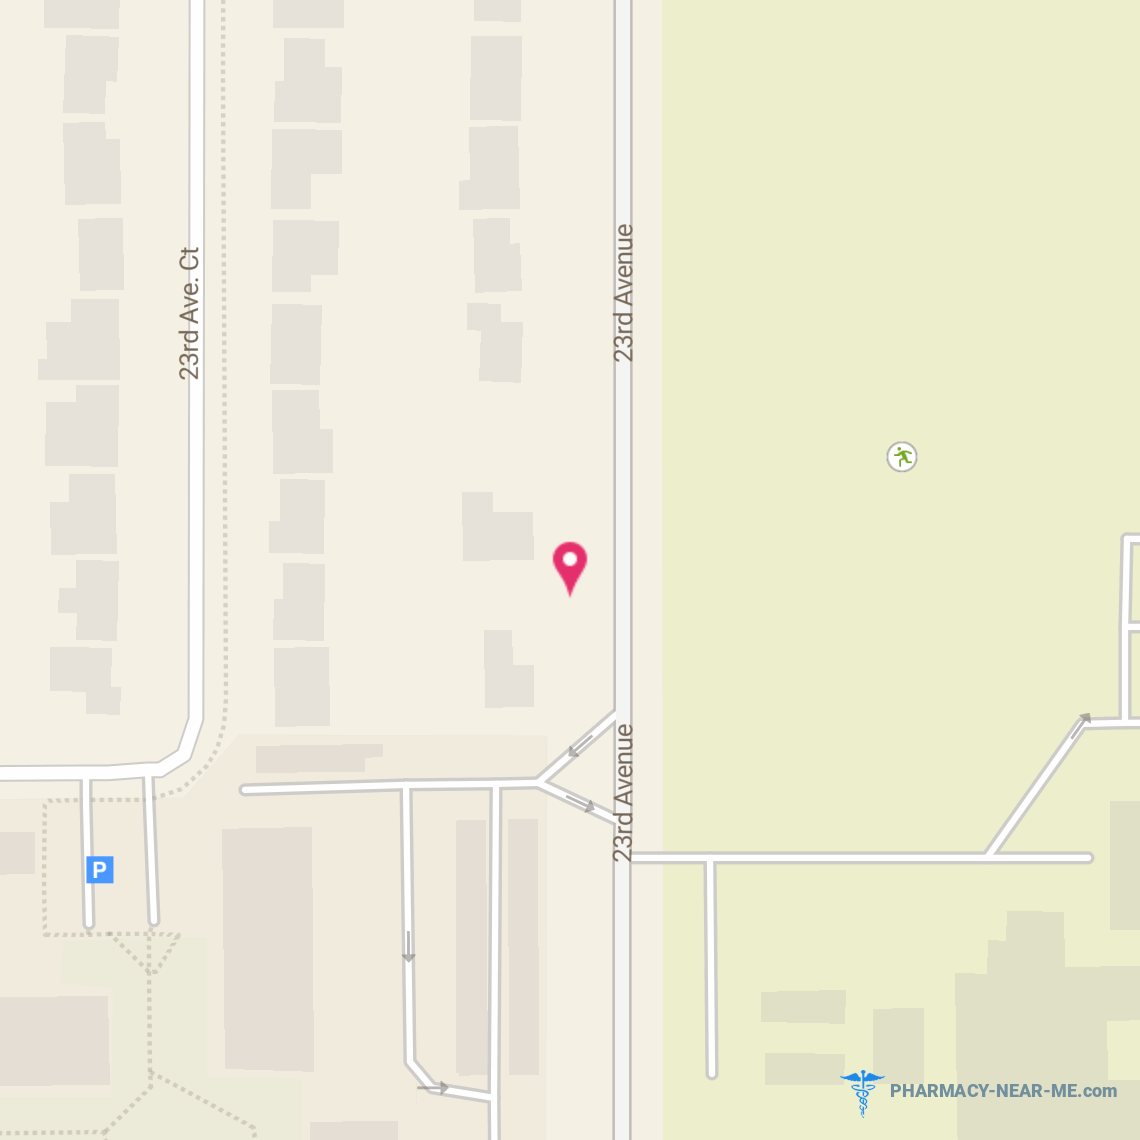 WALGREENS #09244 - Pharmacy Hours, Phone, Reviews & Information: 1641 23rd Avenue, Greeley, Colorado 80634, United States